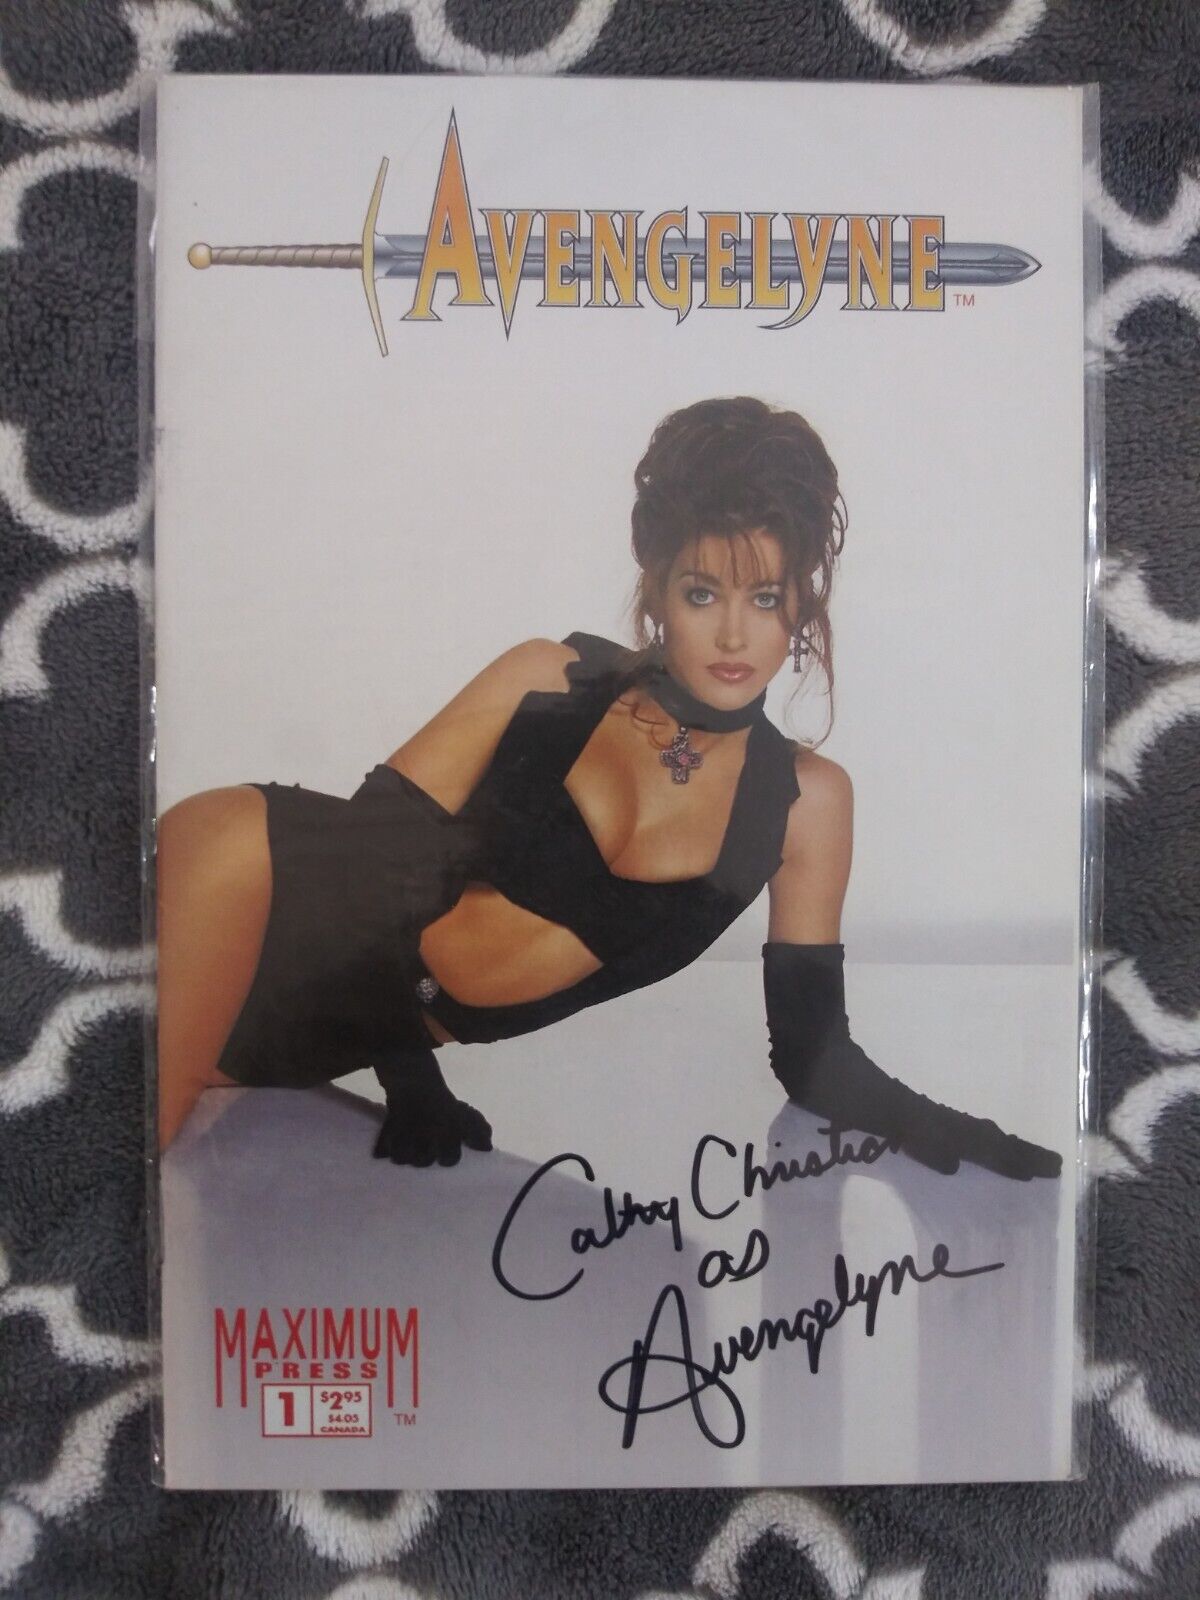 Avengelyne- Maximum Press 1st Issue - Signed by Cathy Christian - NM- Comic Book